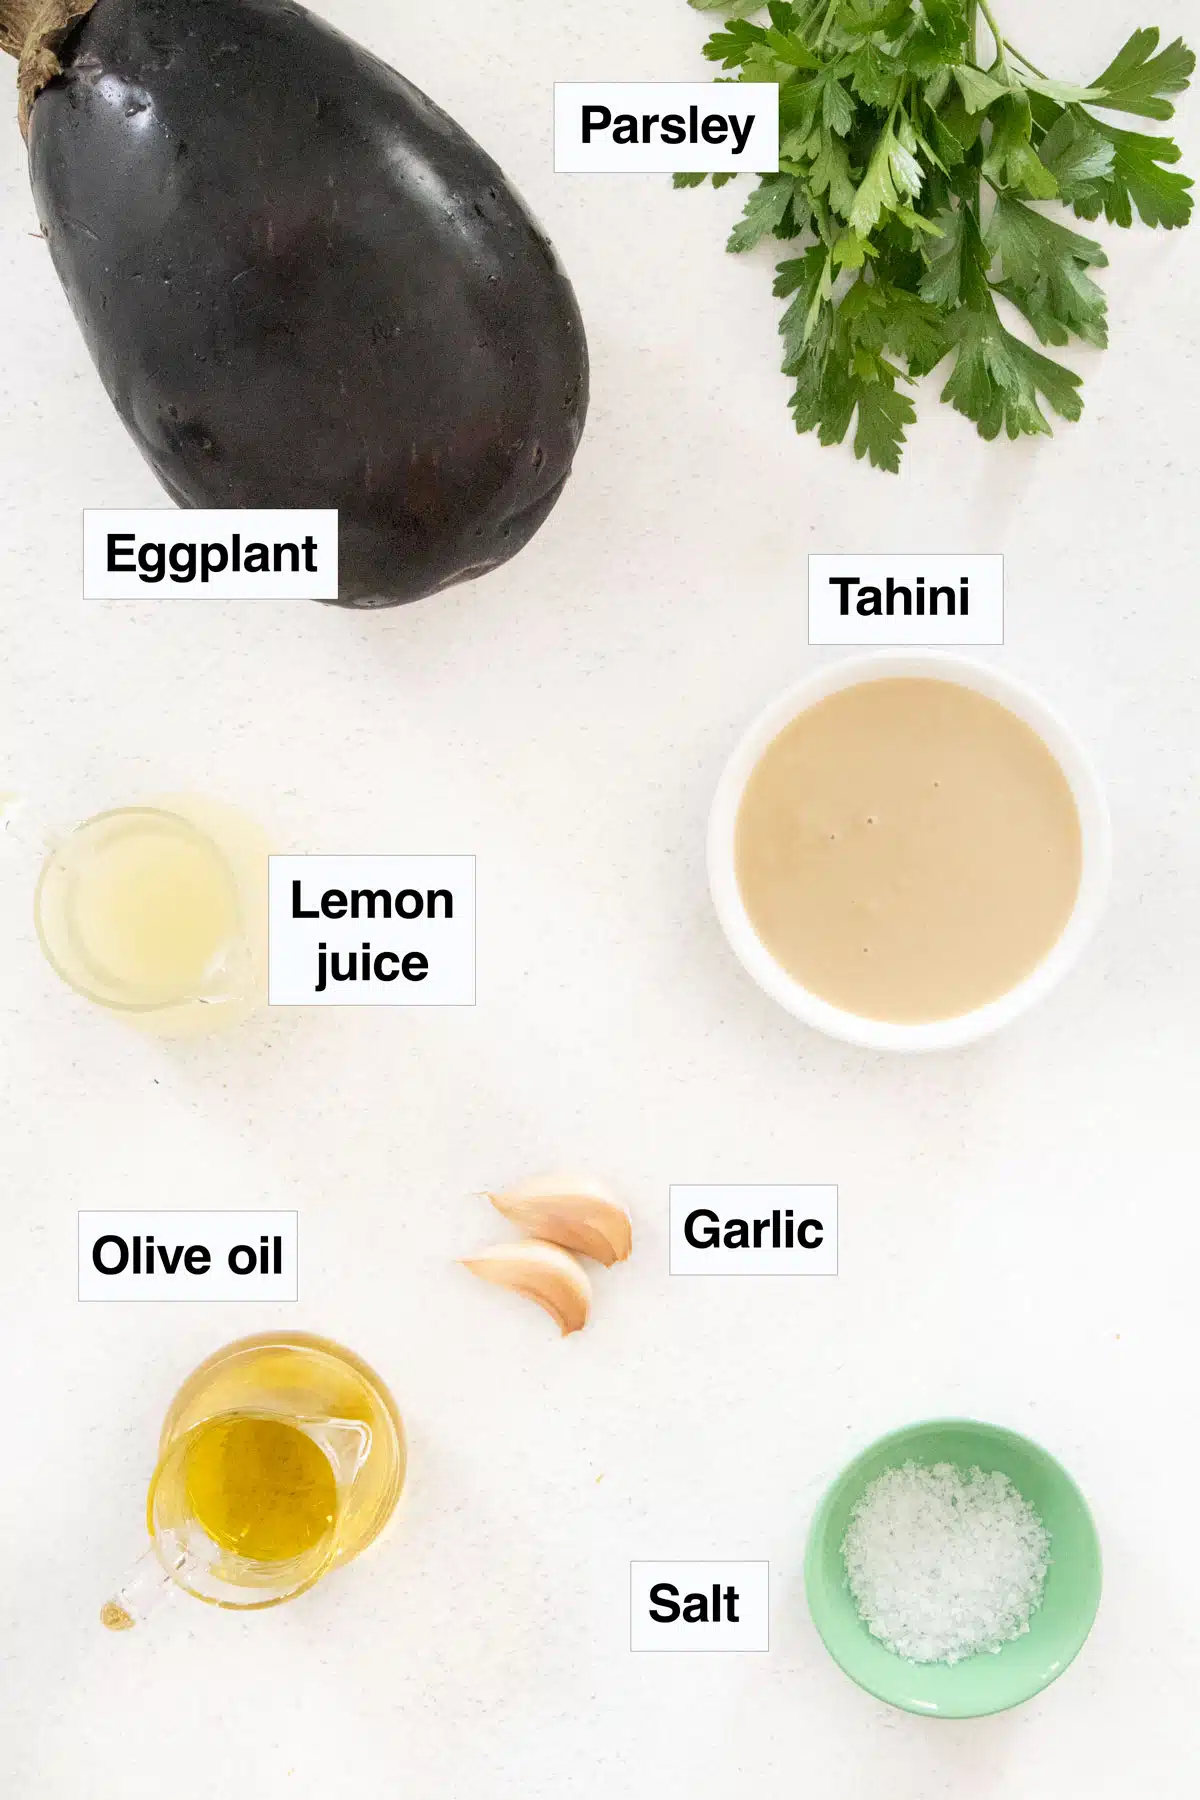 All the ingredients needed to make an eggplant dip / baba ganoush are laid out across a table in various jugs and bowls.